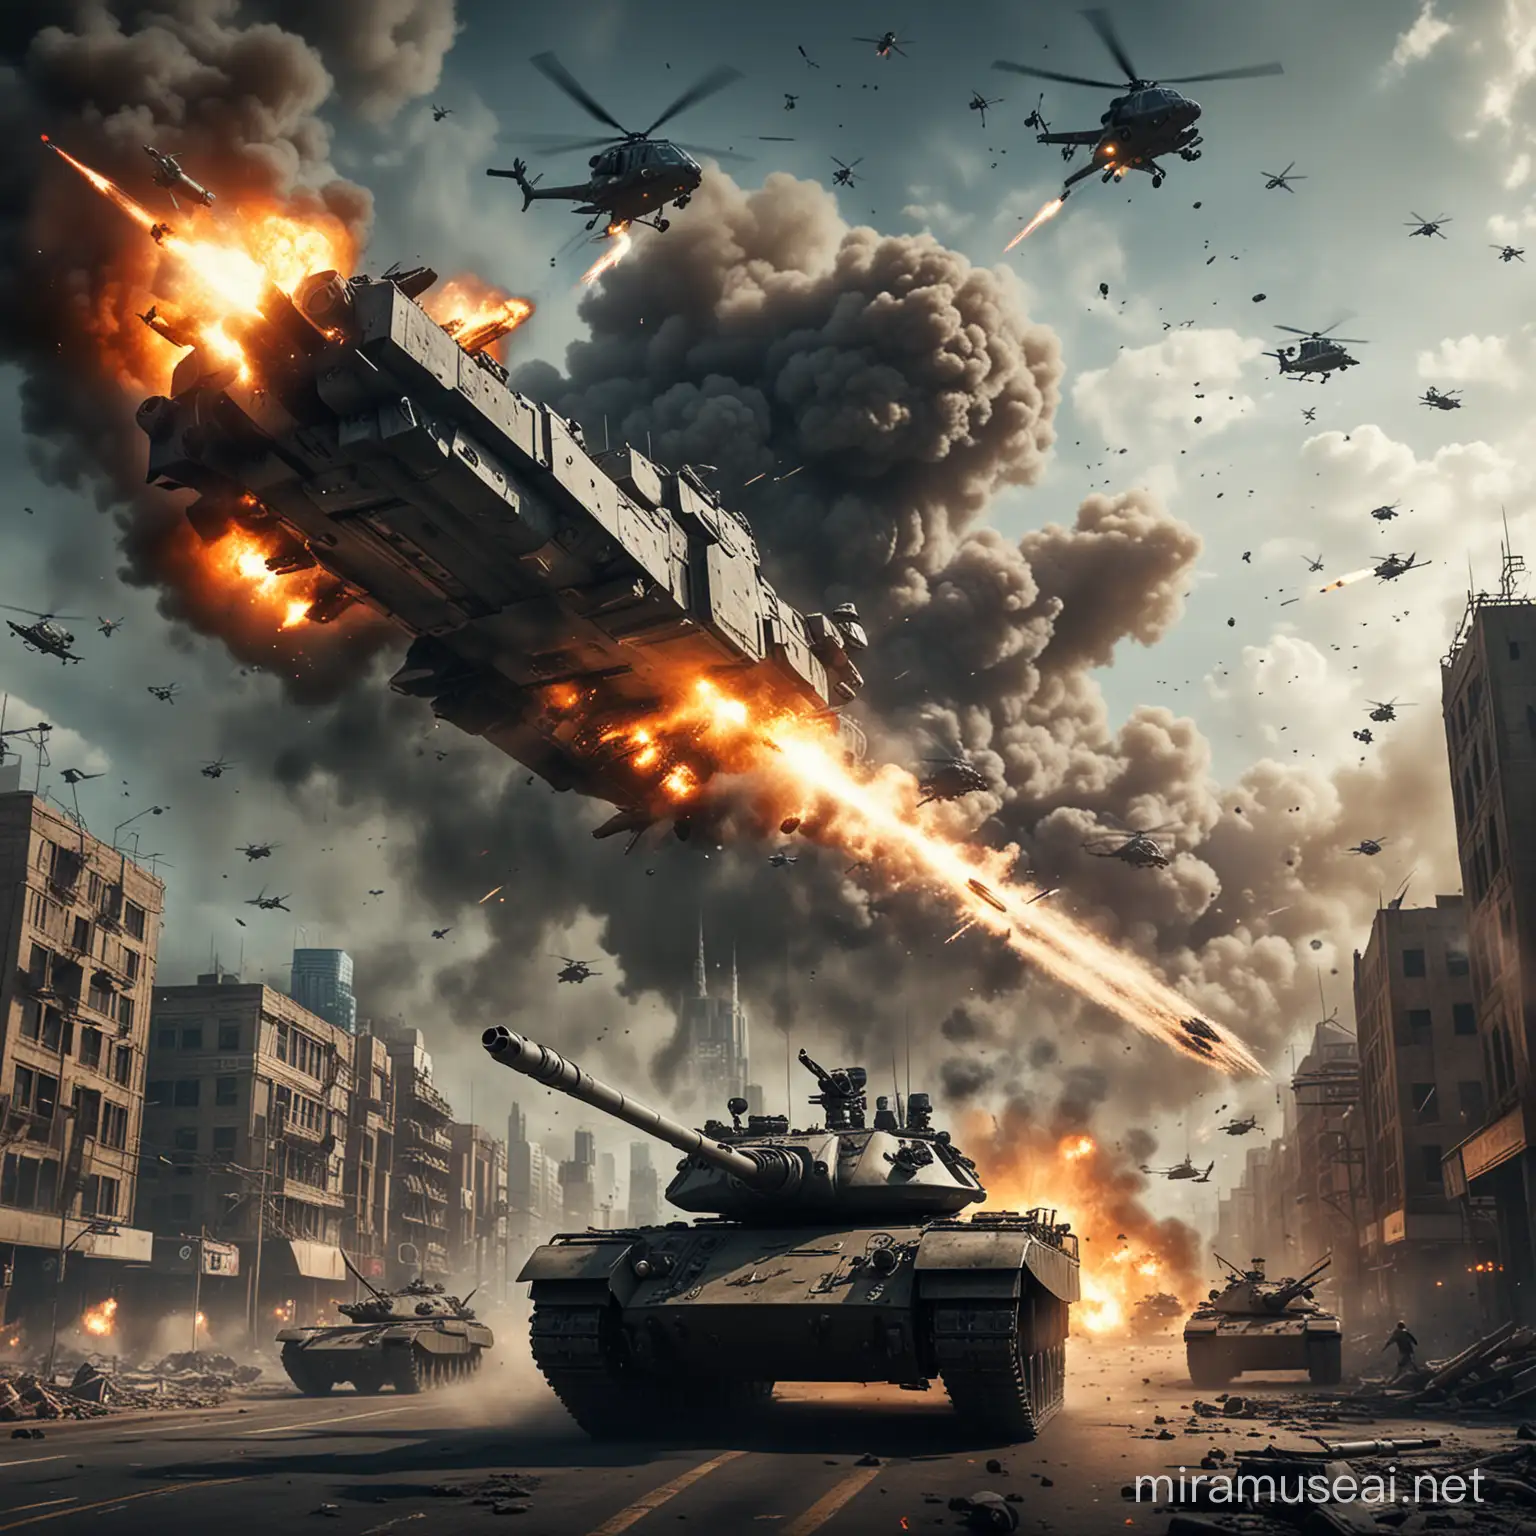 Futuristic Urban Battlefield with Helicopters and Tanks Engulfed in Flames